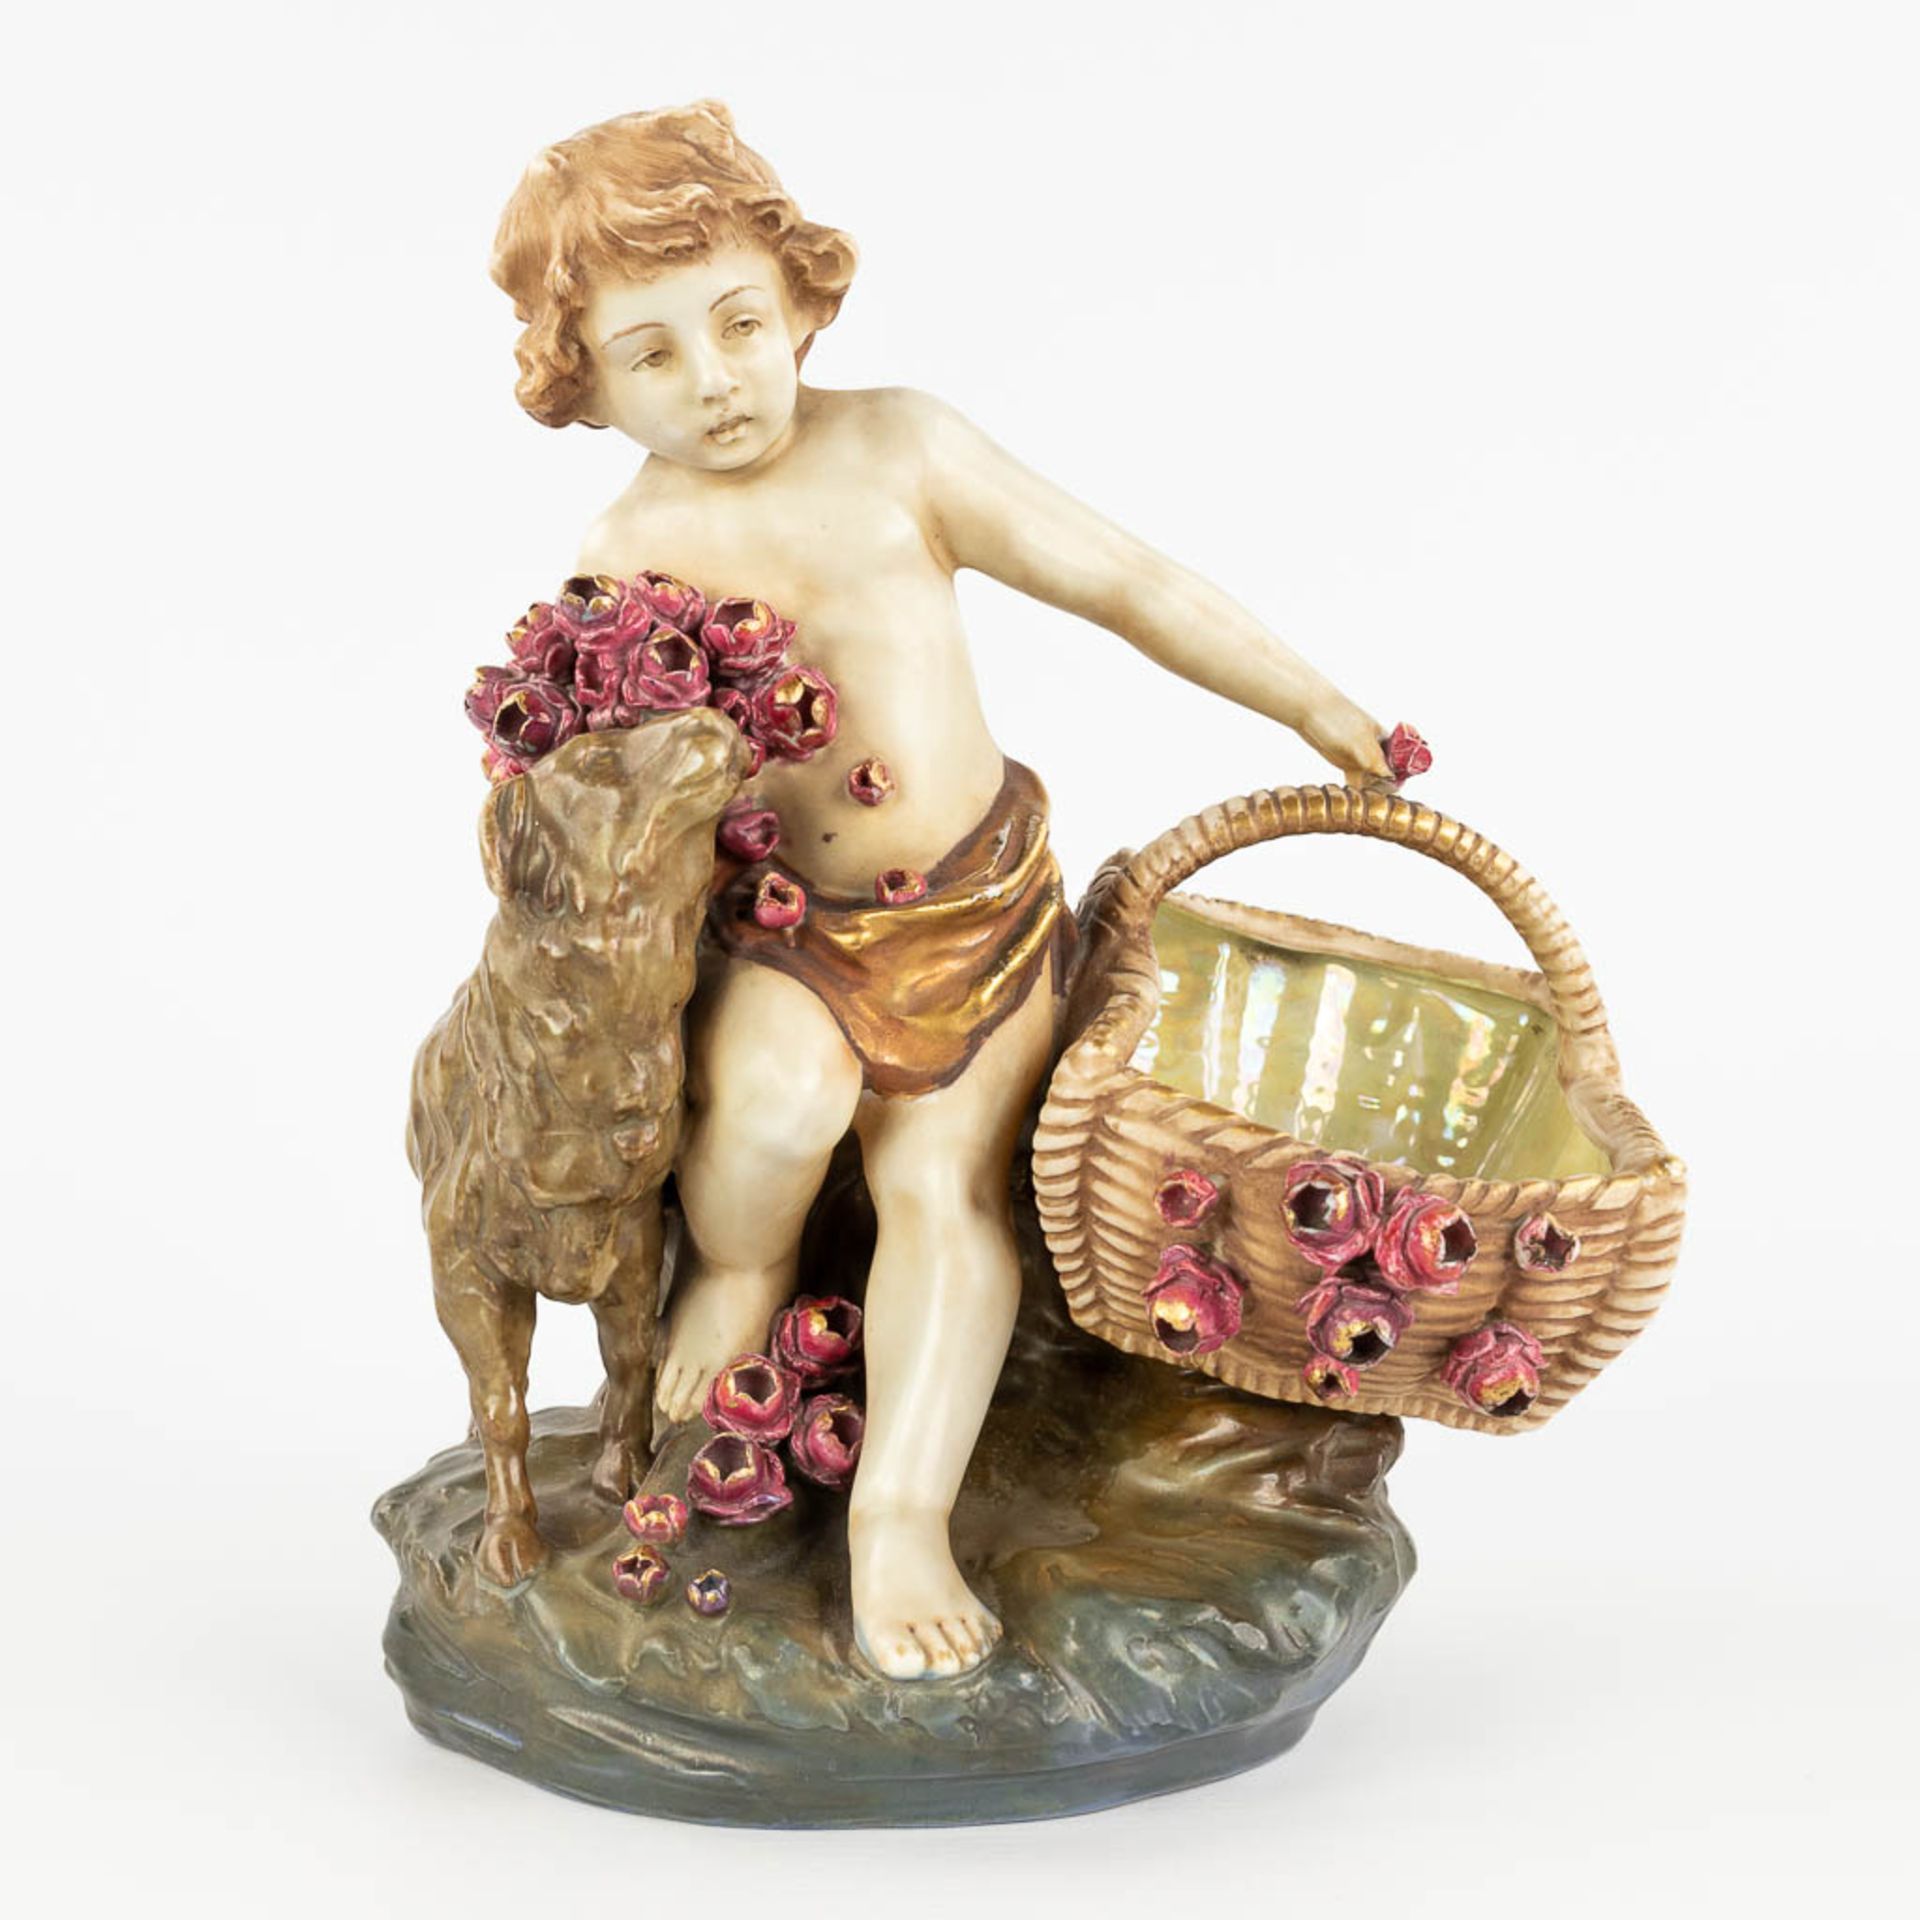 Amphora Austria, 'Child with a basket and sheep' made of glazed faience. (L: 18 x W: 24 x H: 29,5 cm